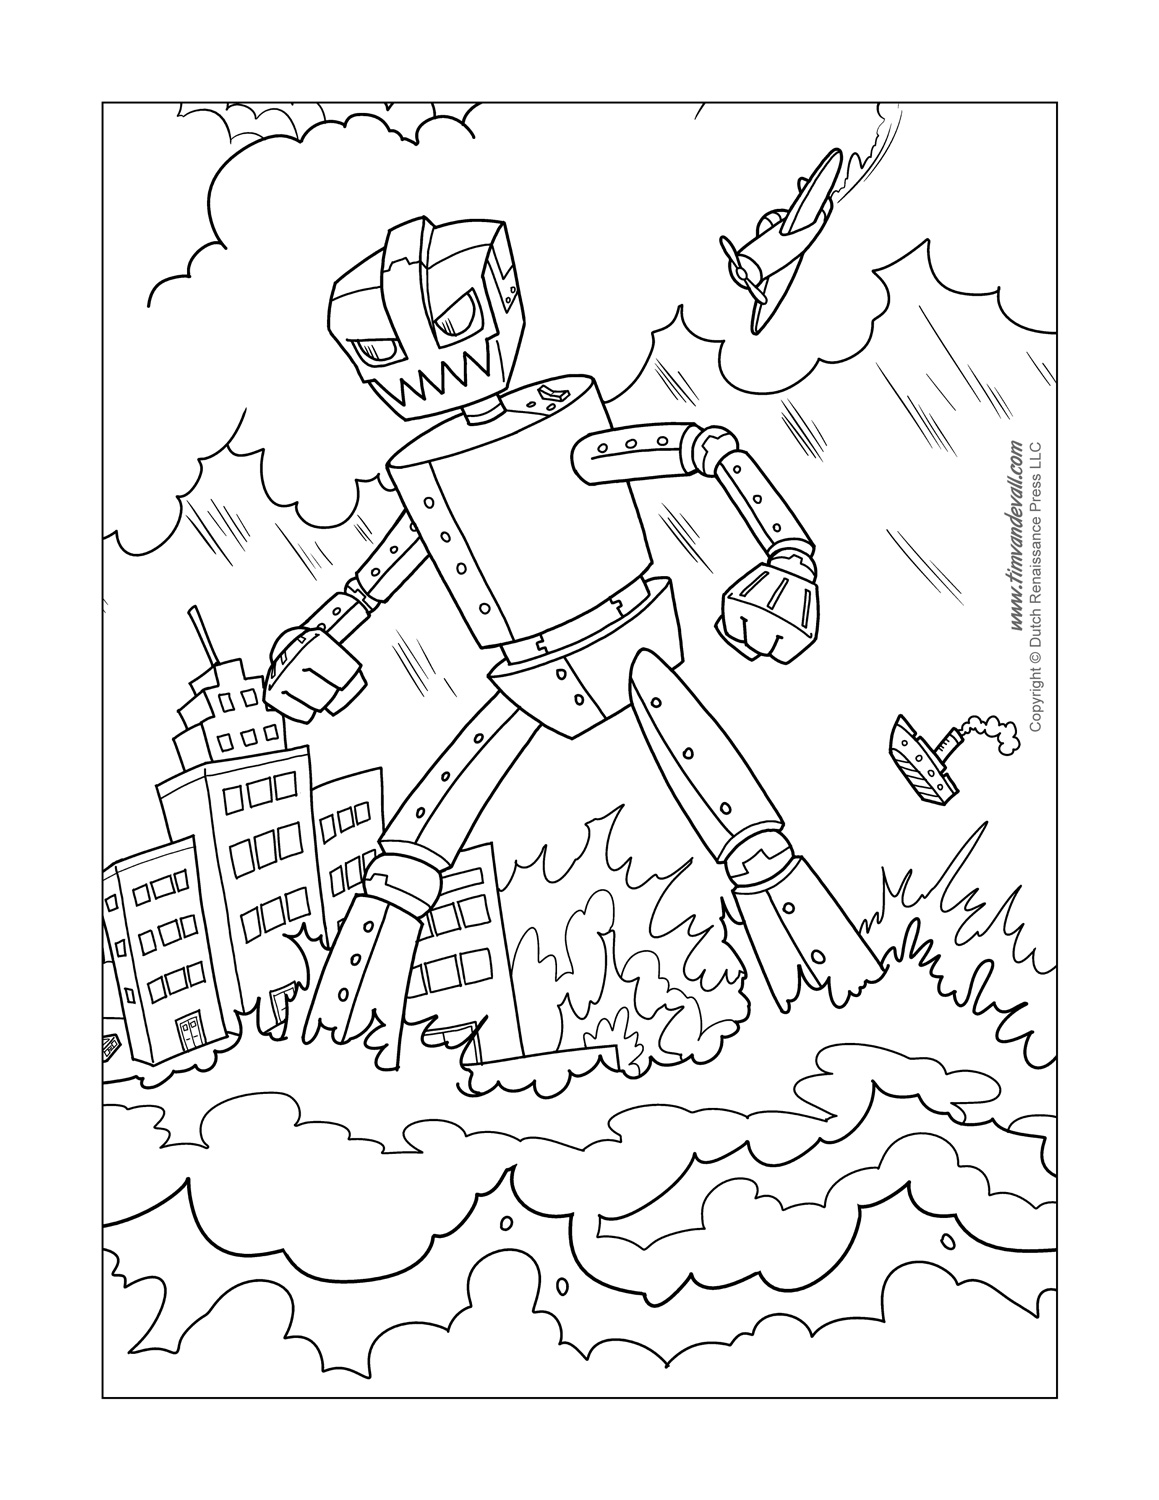 Printable Robot Coloring Pages | Coloring Pages for Kids